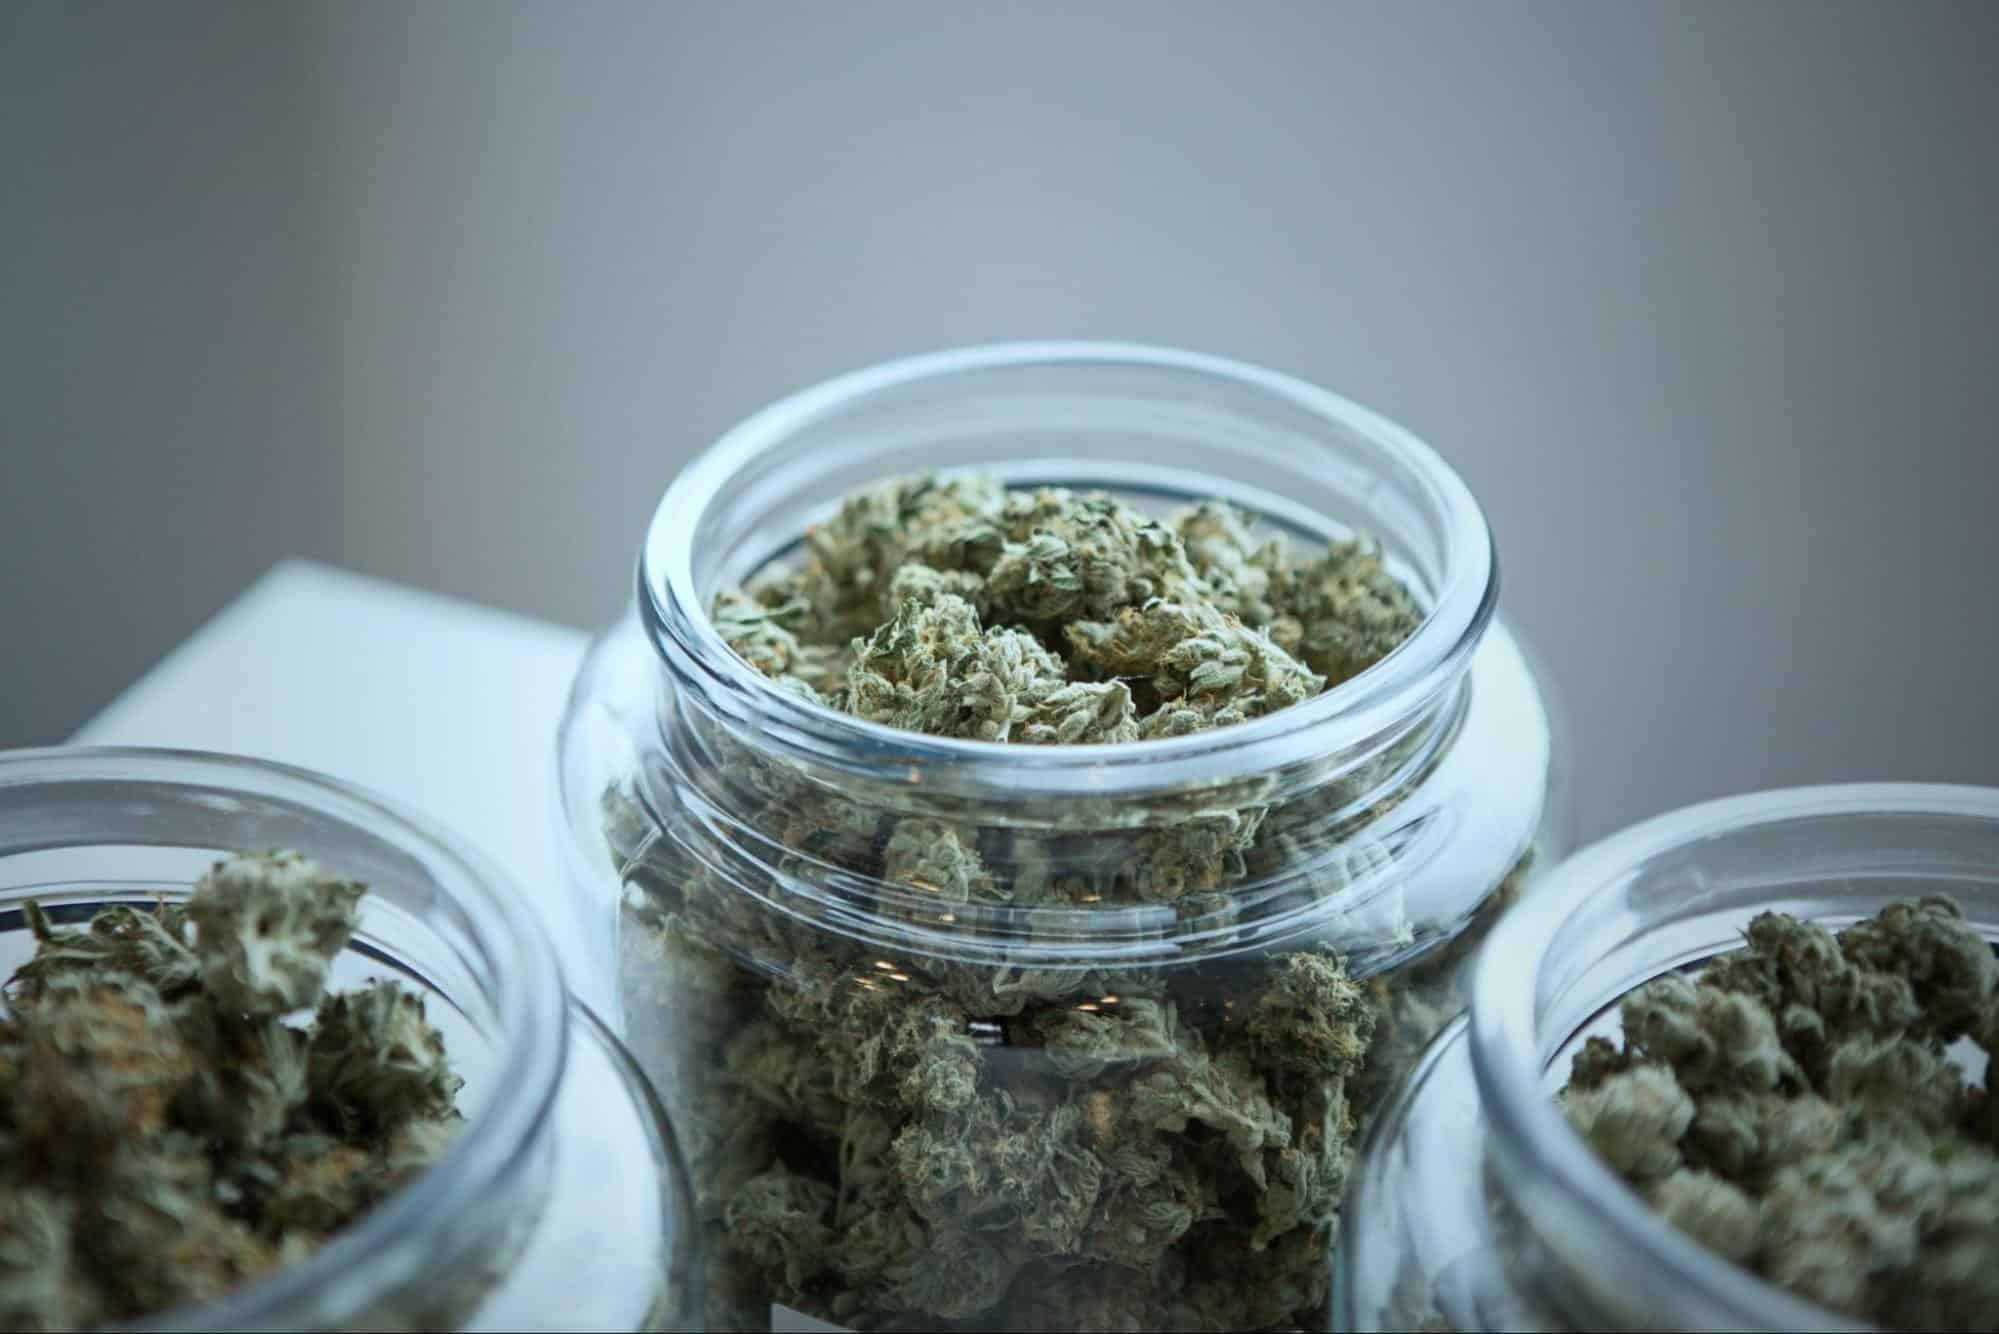 Three jars filled with premium cannabis buds, showcasing a variety of strains available for how to buy marijuana seeds online